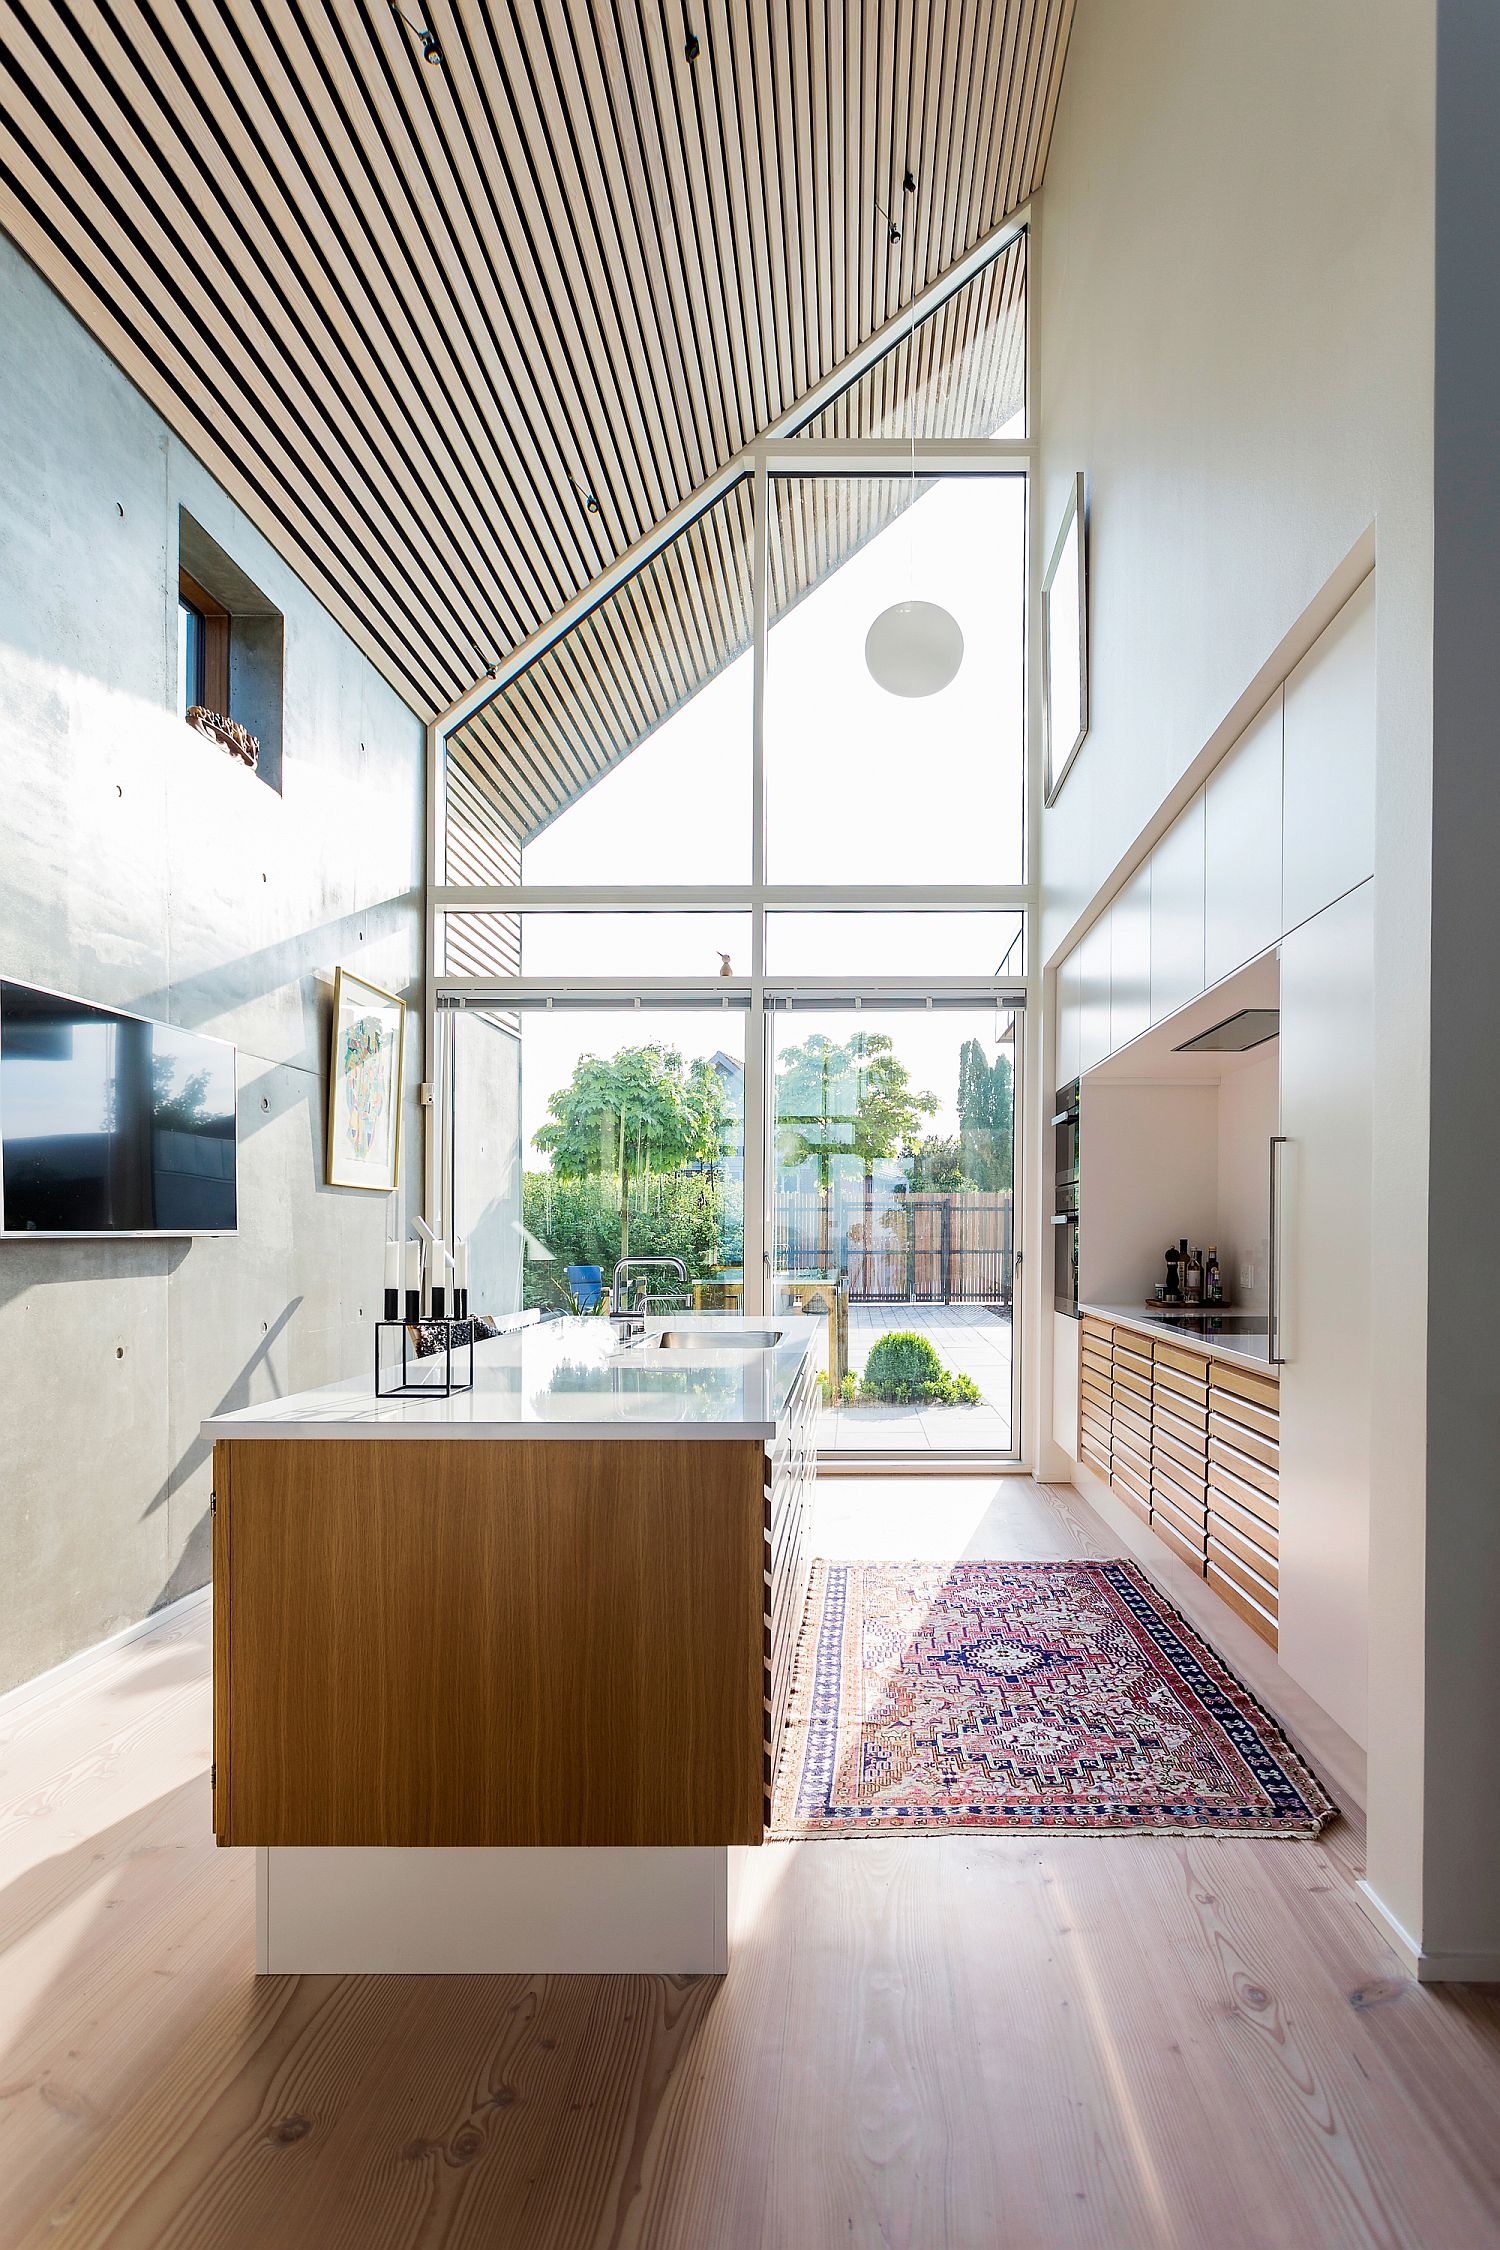 Angular roof, large glass windows and high ceilings give the interior an airy, modern appeal